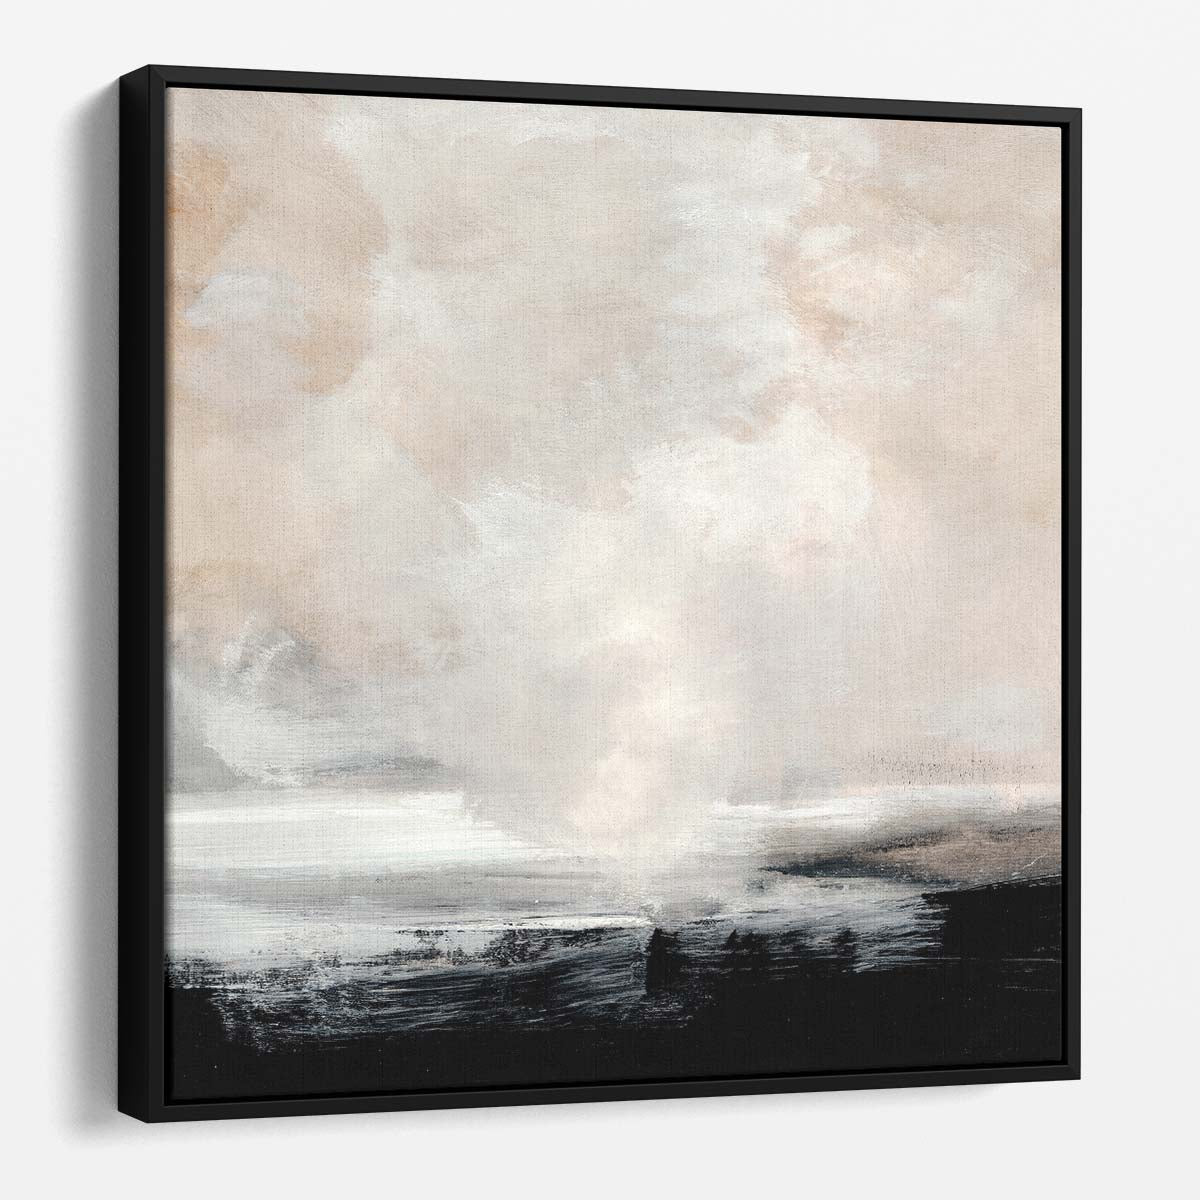 Contemporary Sky & Clouds Abstract Illustration Modern Minimalist Wall Art by Luxuriance Designs. Made in USA.